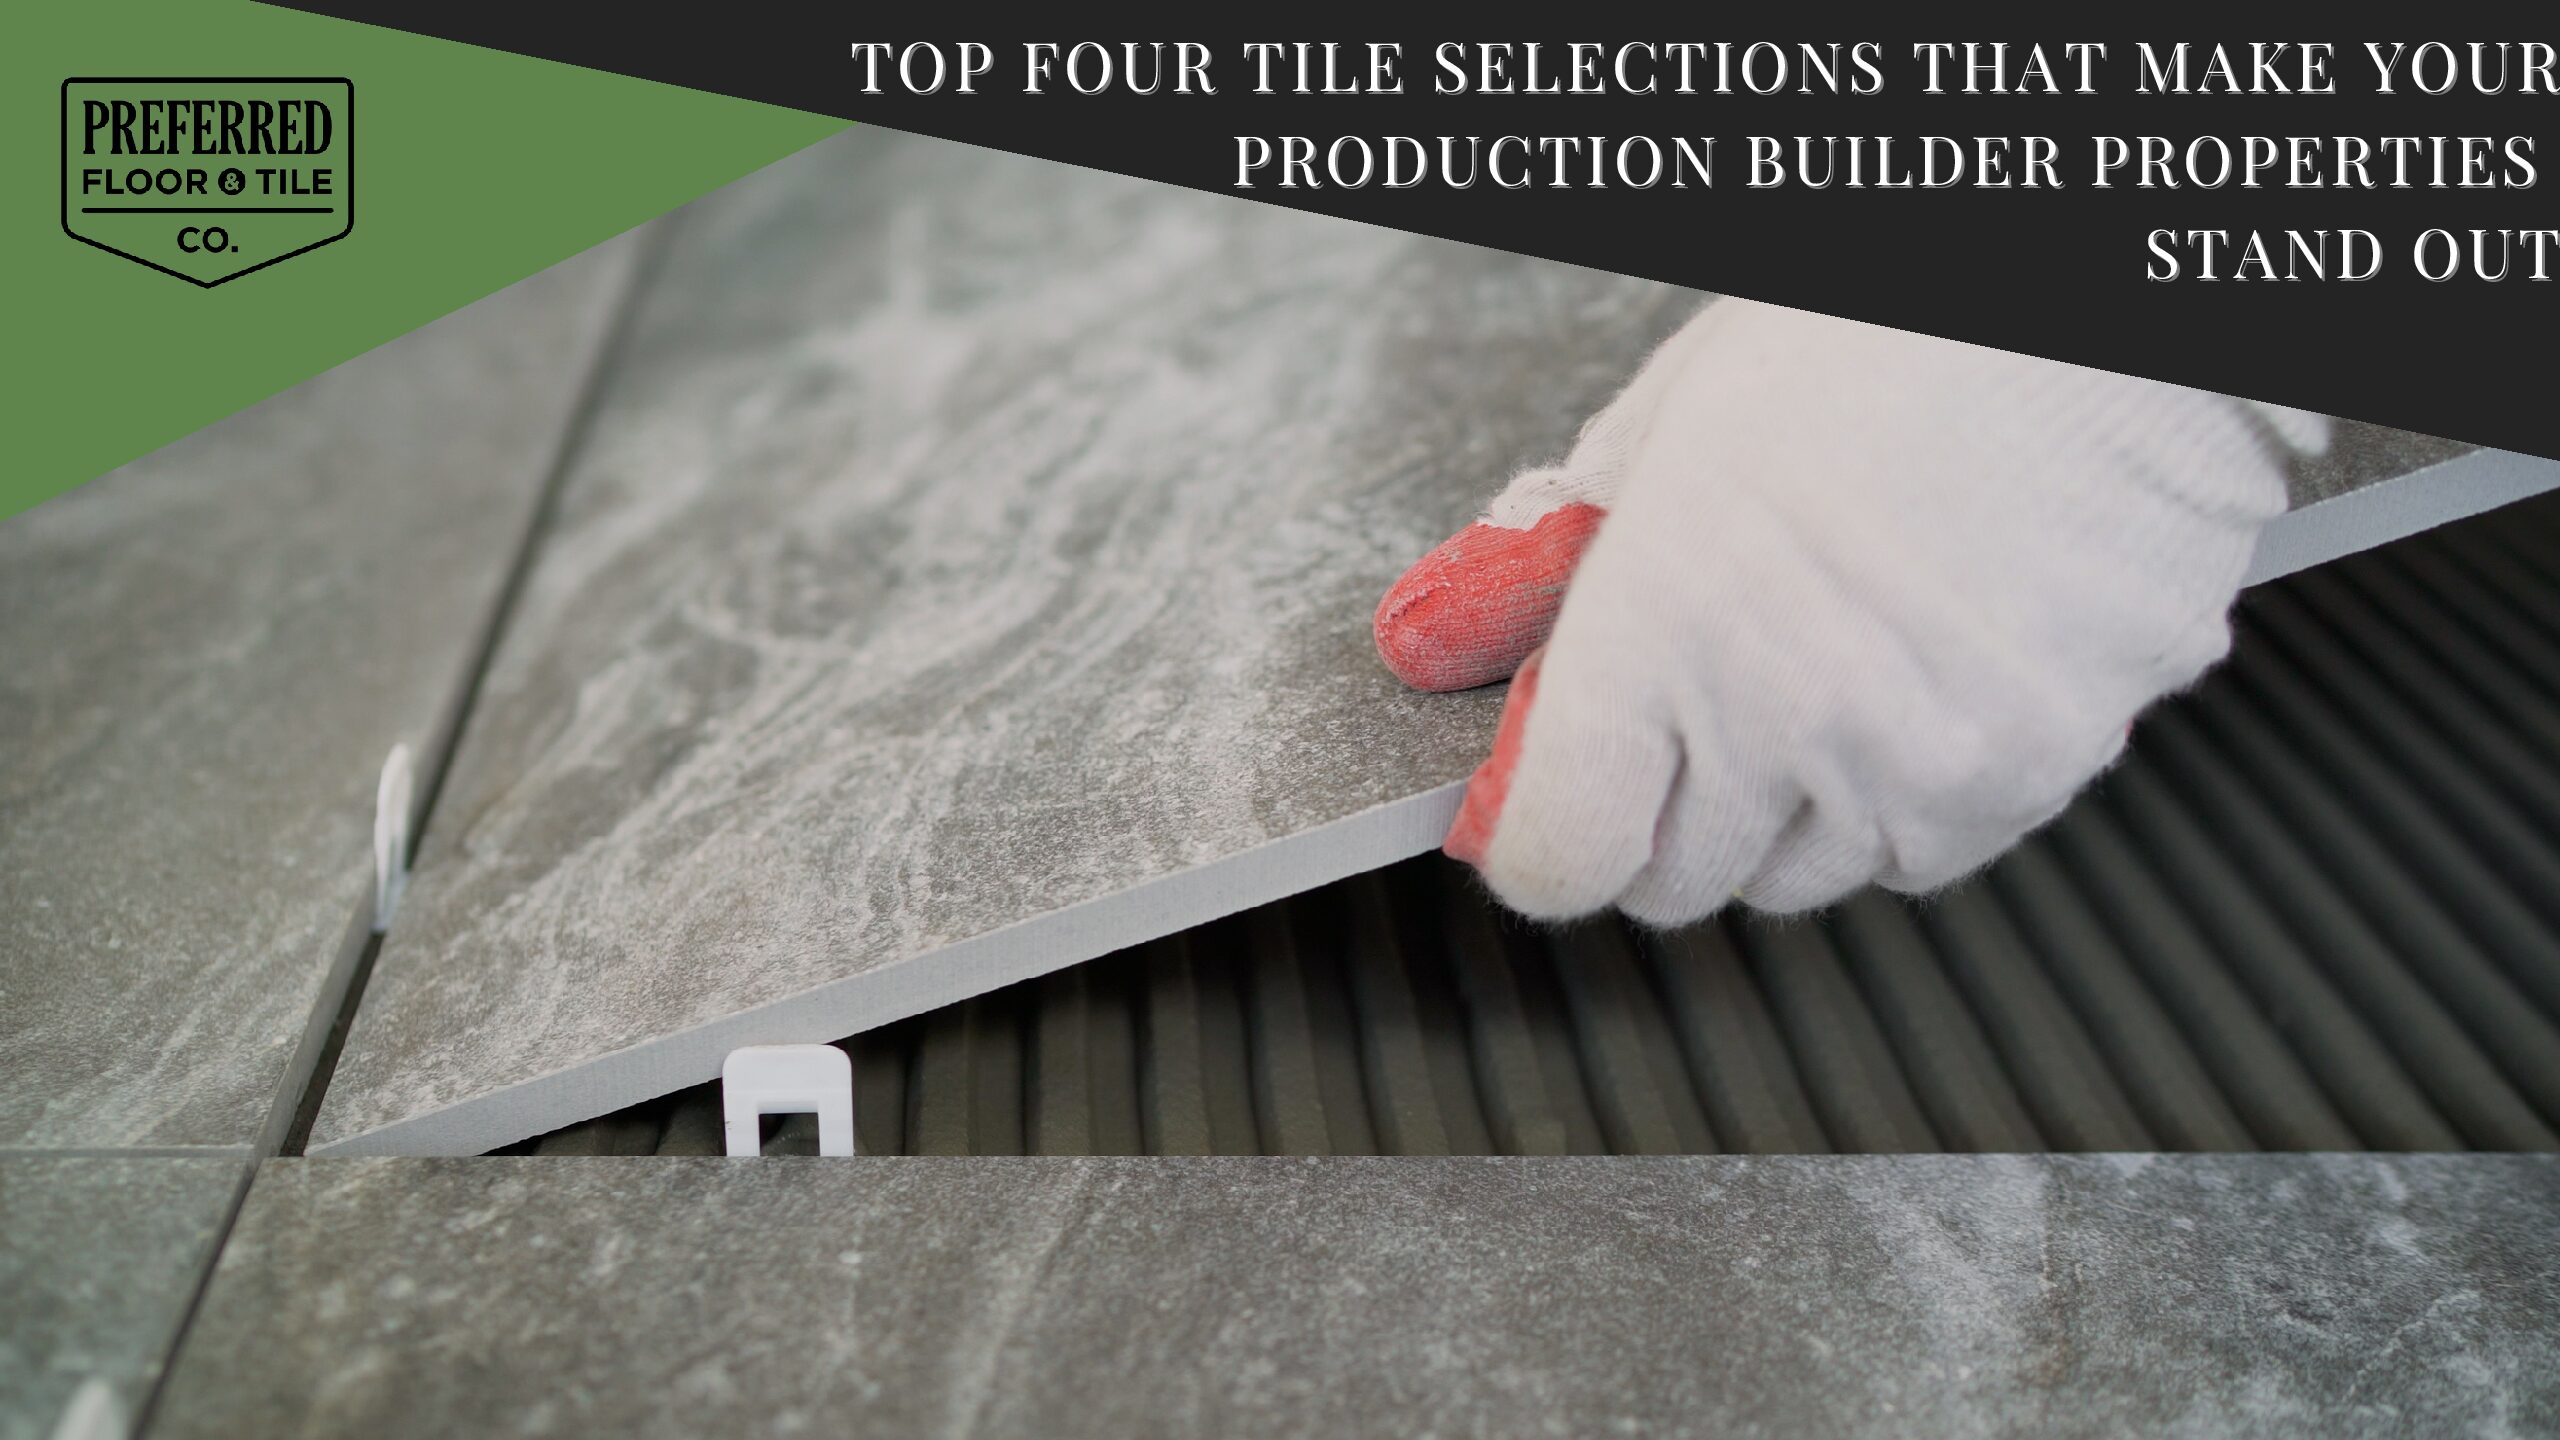 Top Four Tile Selections That Make Your Production Builder Properties Stand Out